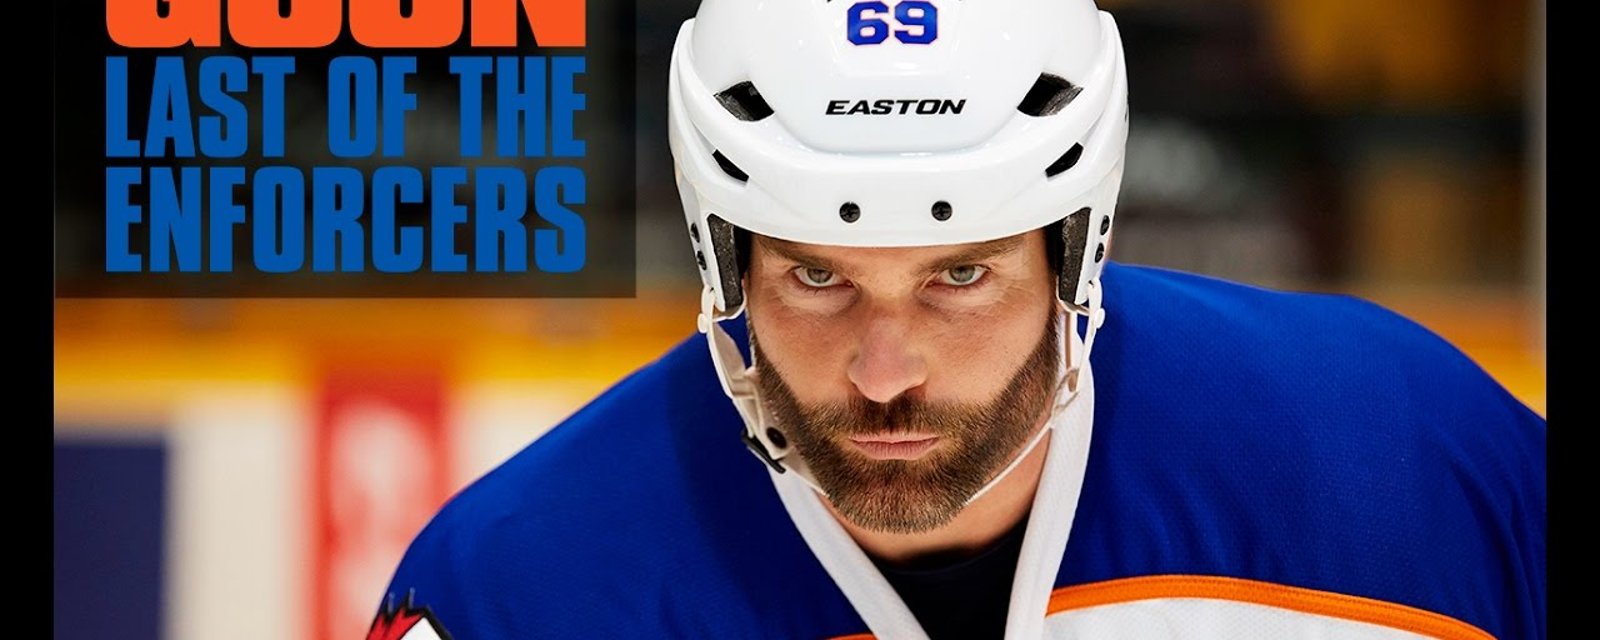 Goon 2 FINALLY gets a release date in the US!